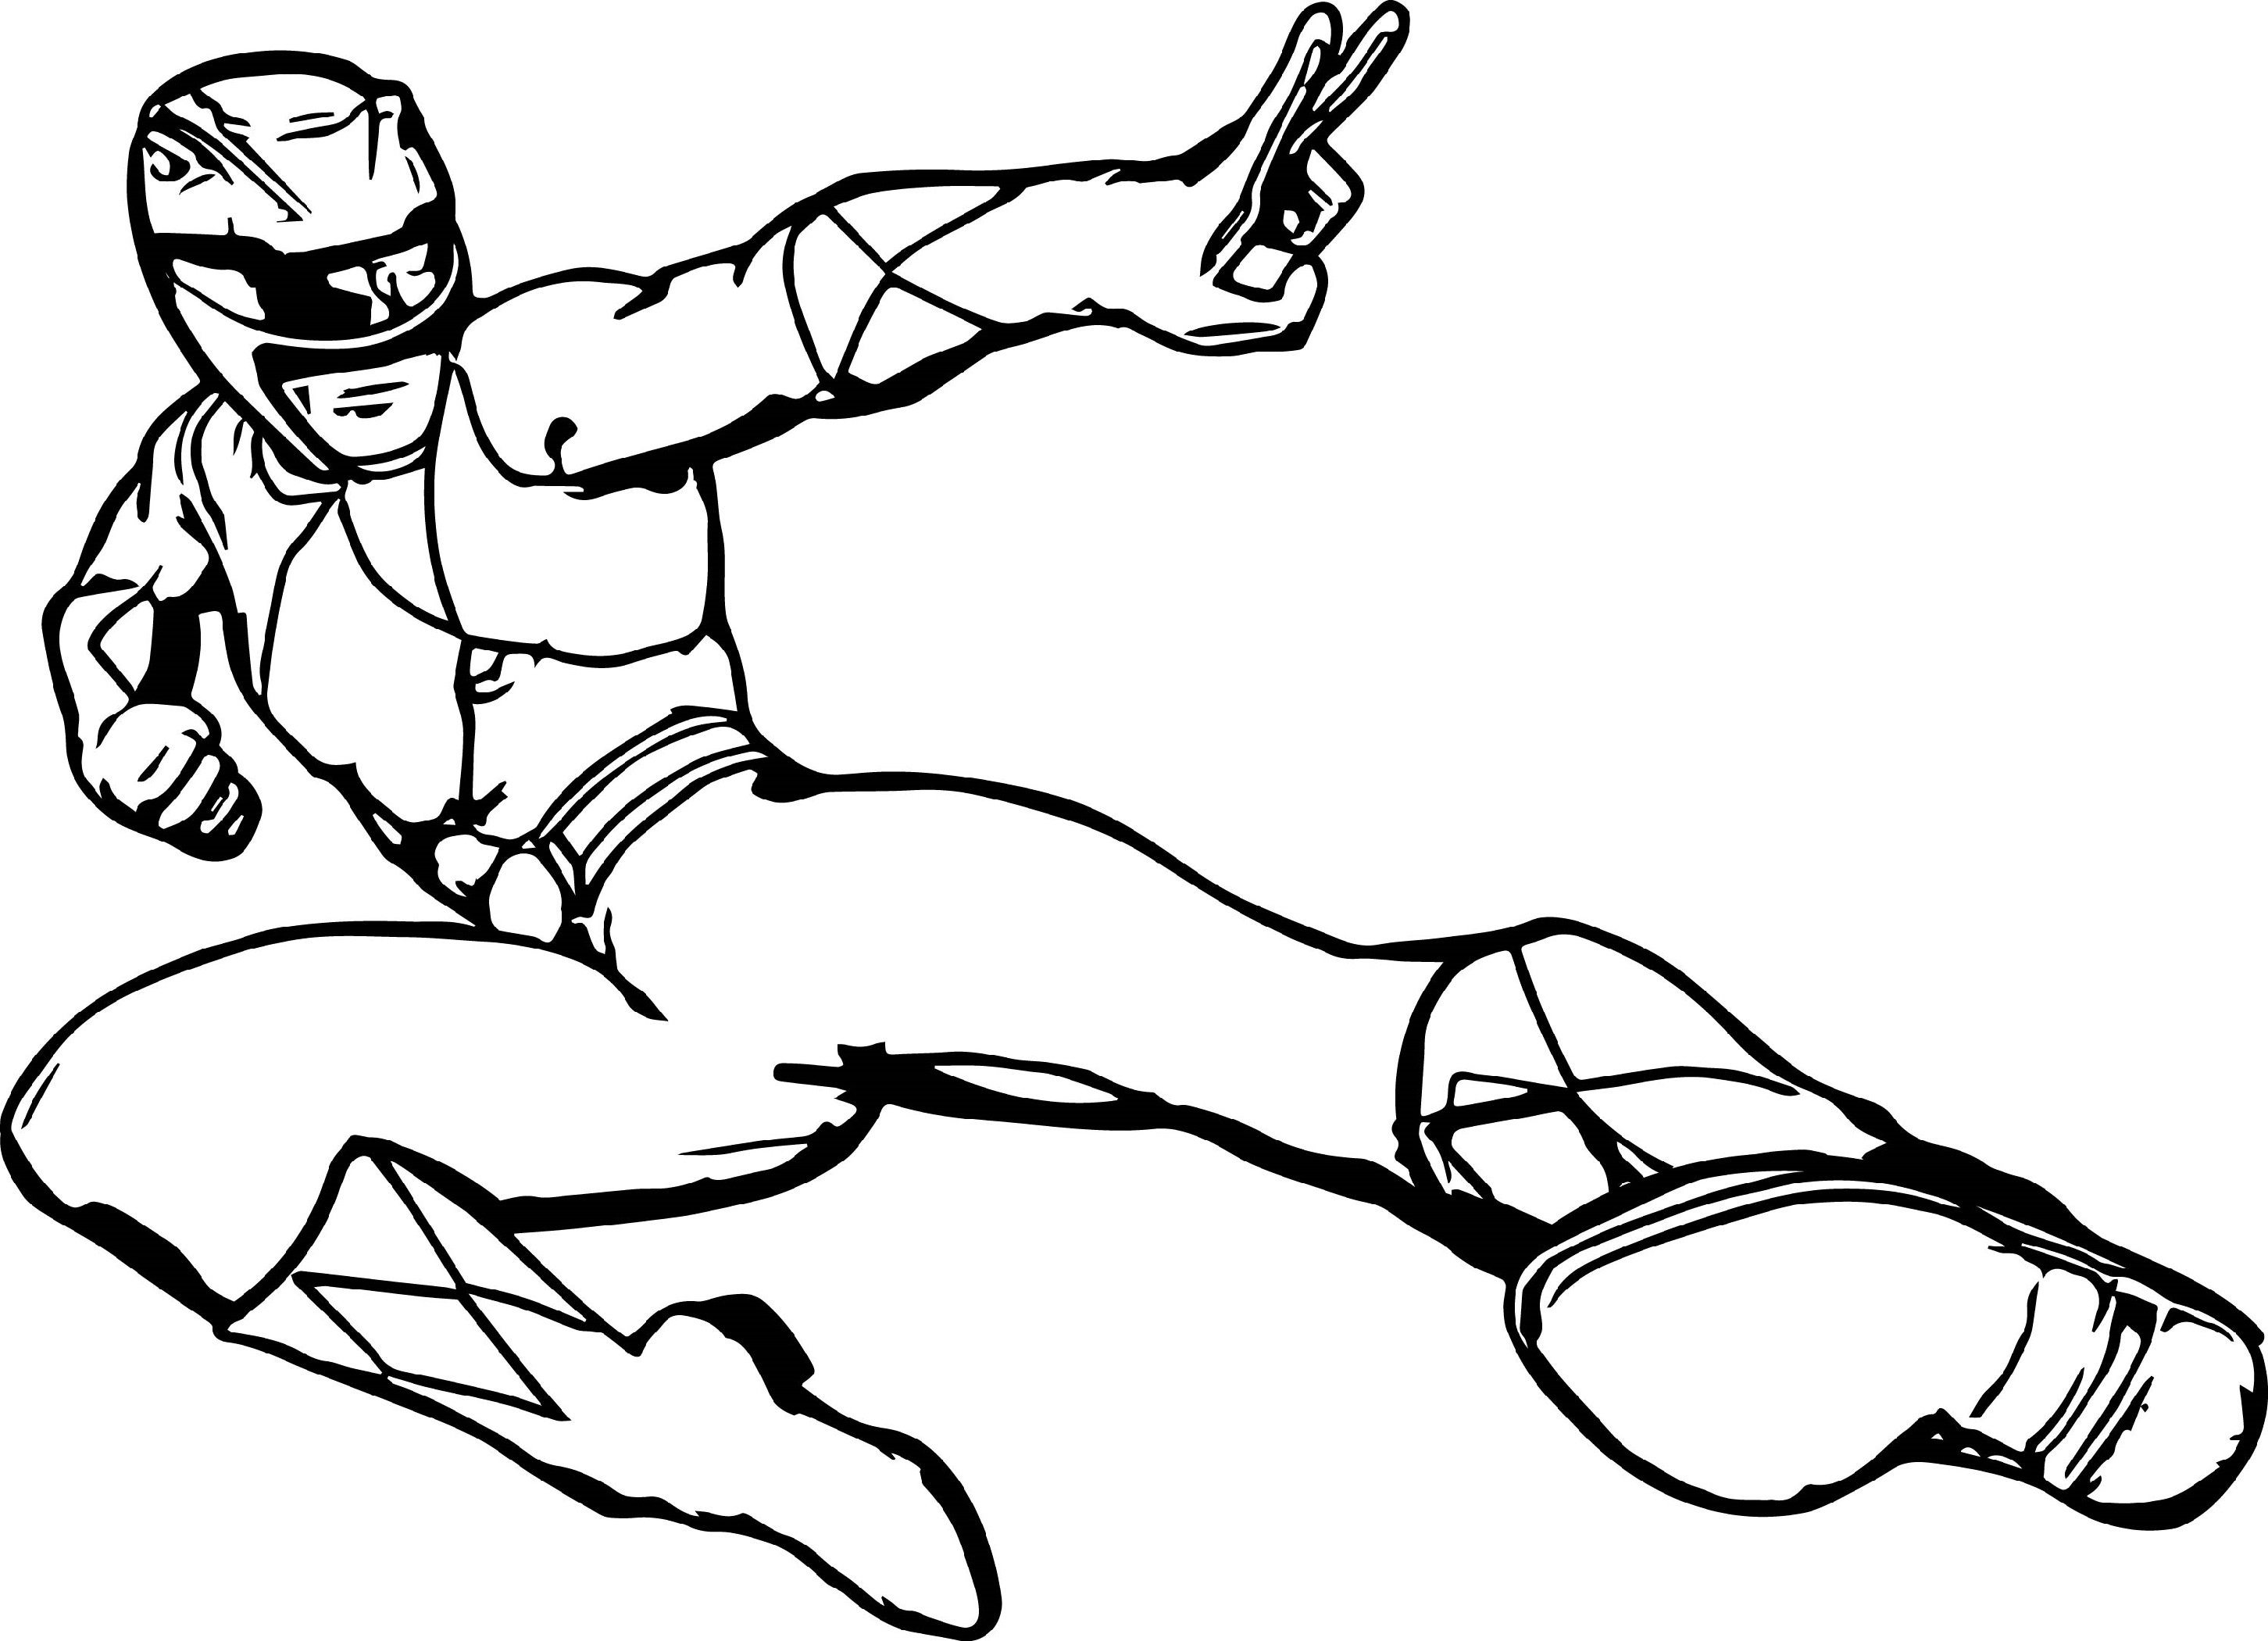 Superhero Power Rangers Coloring Pages | 101 Coloring